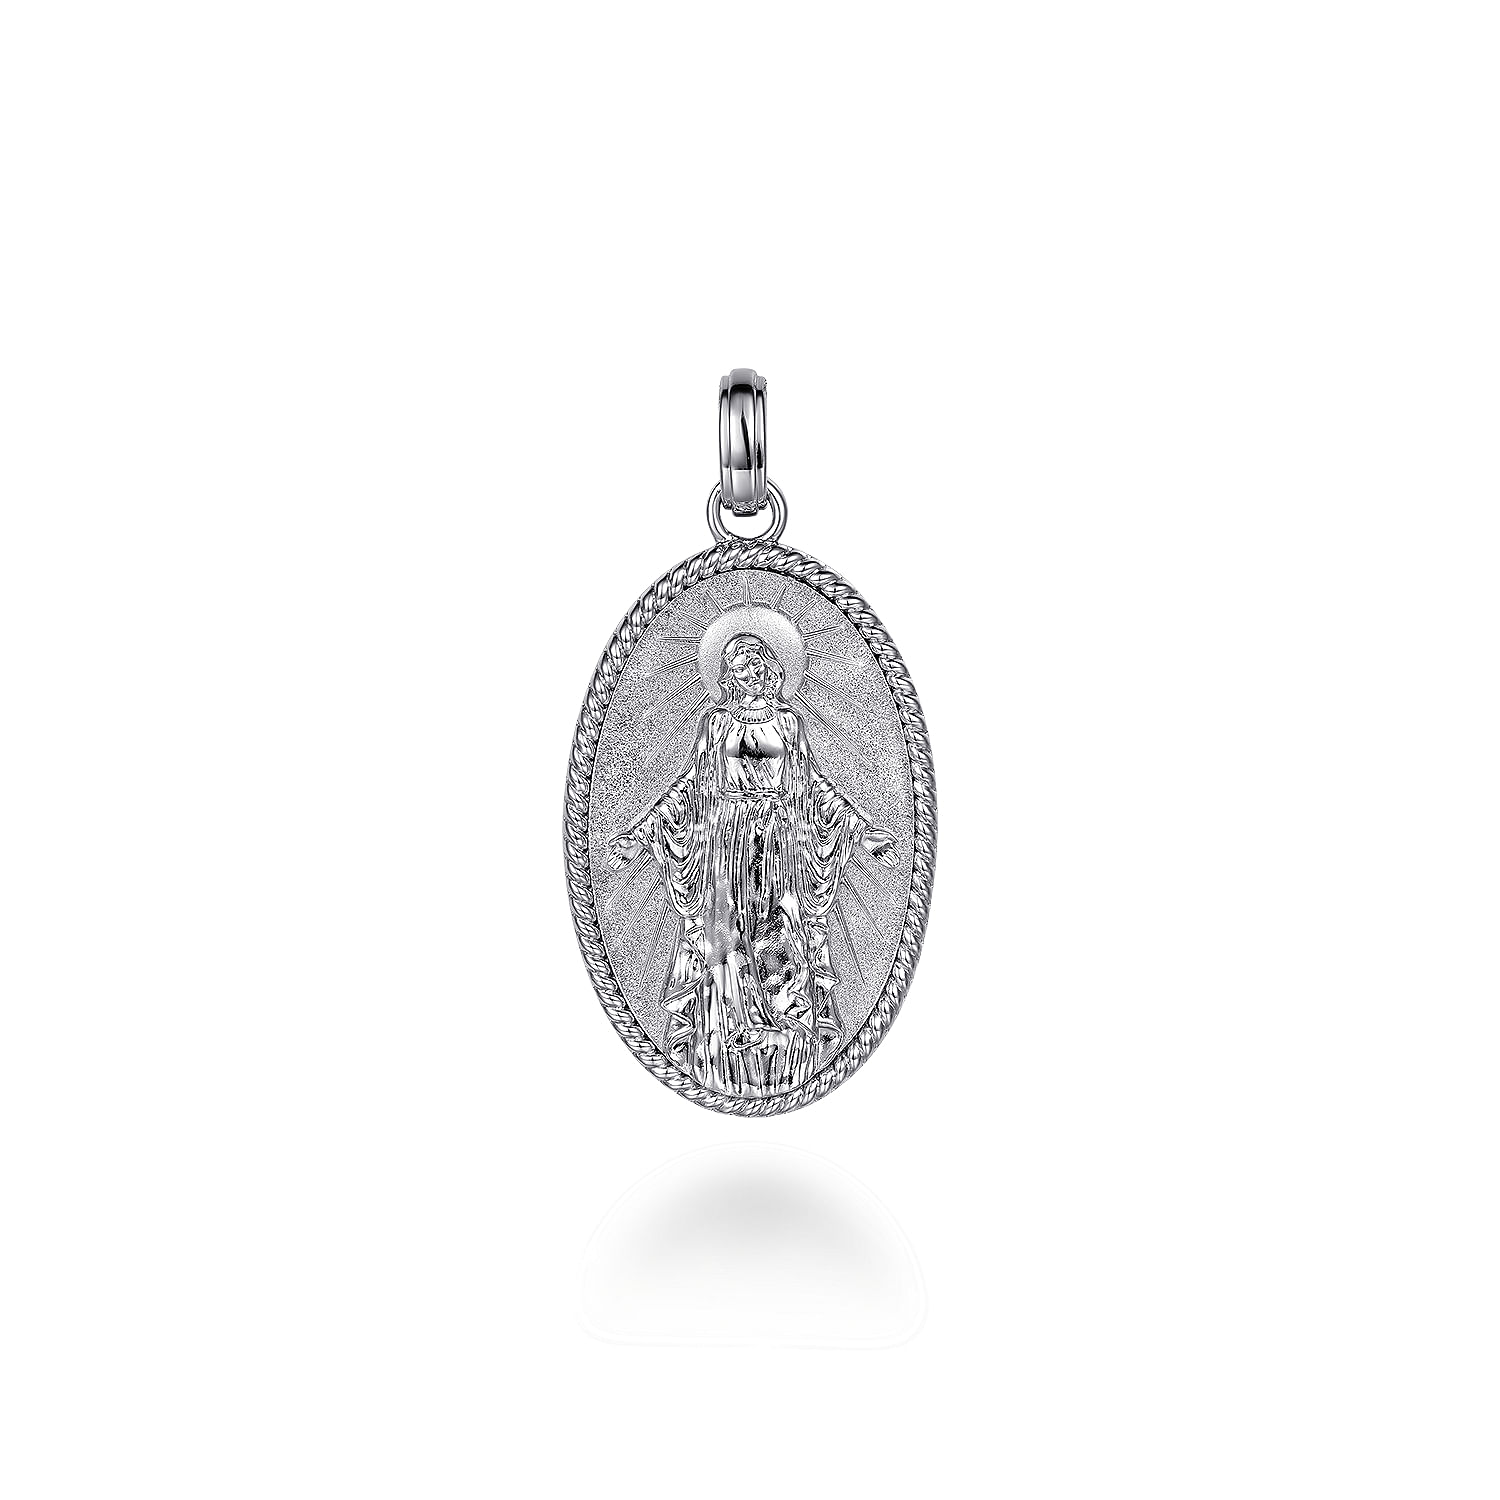 Oval 925 Sterling Silver Virgin Mary Pendant with Twisted Rope Frame